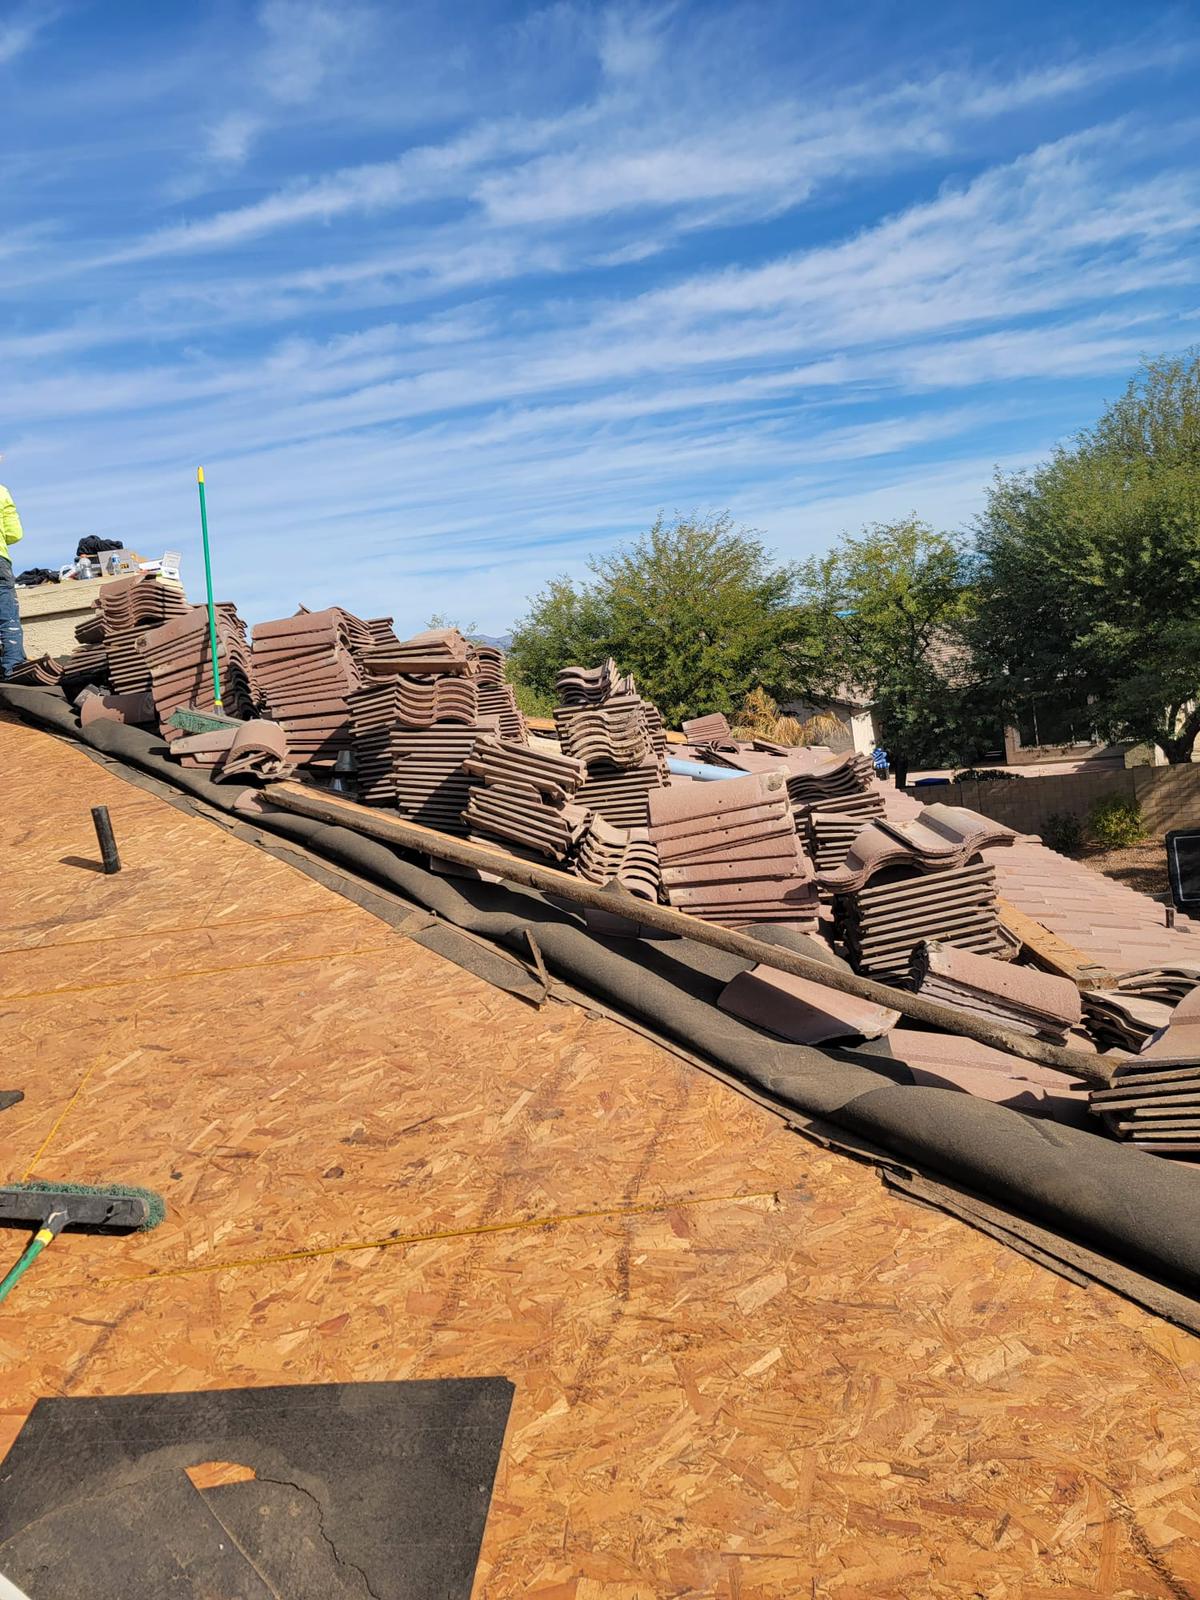 Behmer roofing supplies laid out for an efficient tile re-felt job in the Estancia community.